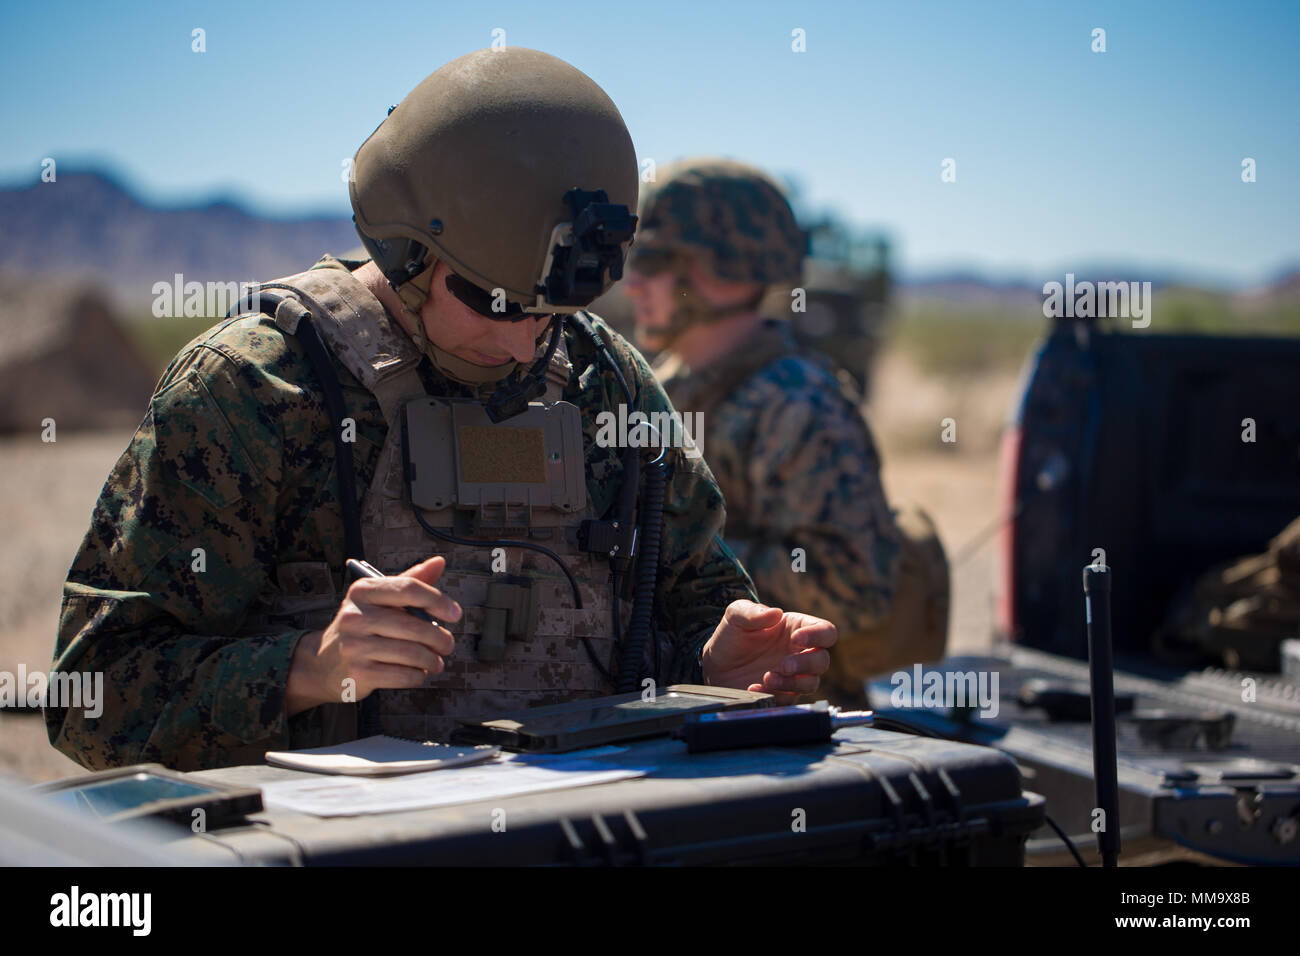 U.S Marine Corps Maj. Josh Foster, Air Ordnance Disposal Instructor with Marine Aviation Weapons and Tactics Squadron One (MAWTS-1) provide digitally aided close air support using radios and tablets in support of Weapons Tactics Instructors course (WTI) 1-18 at Fire Base Burt, Calif., Sept. 22, 2017. WTI is a seven-week training even hosted by MAWTS-1 cadre, which emphasizes operational integration of the six functions of Marine Corps aviation in support of a Marine Air Ground Task Force and provides standardized advance tactical training and certification of unit instructor qualifications to  Stock Photo